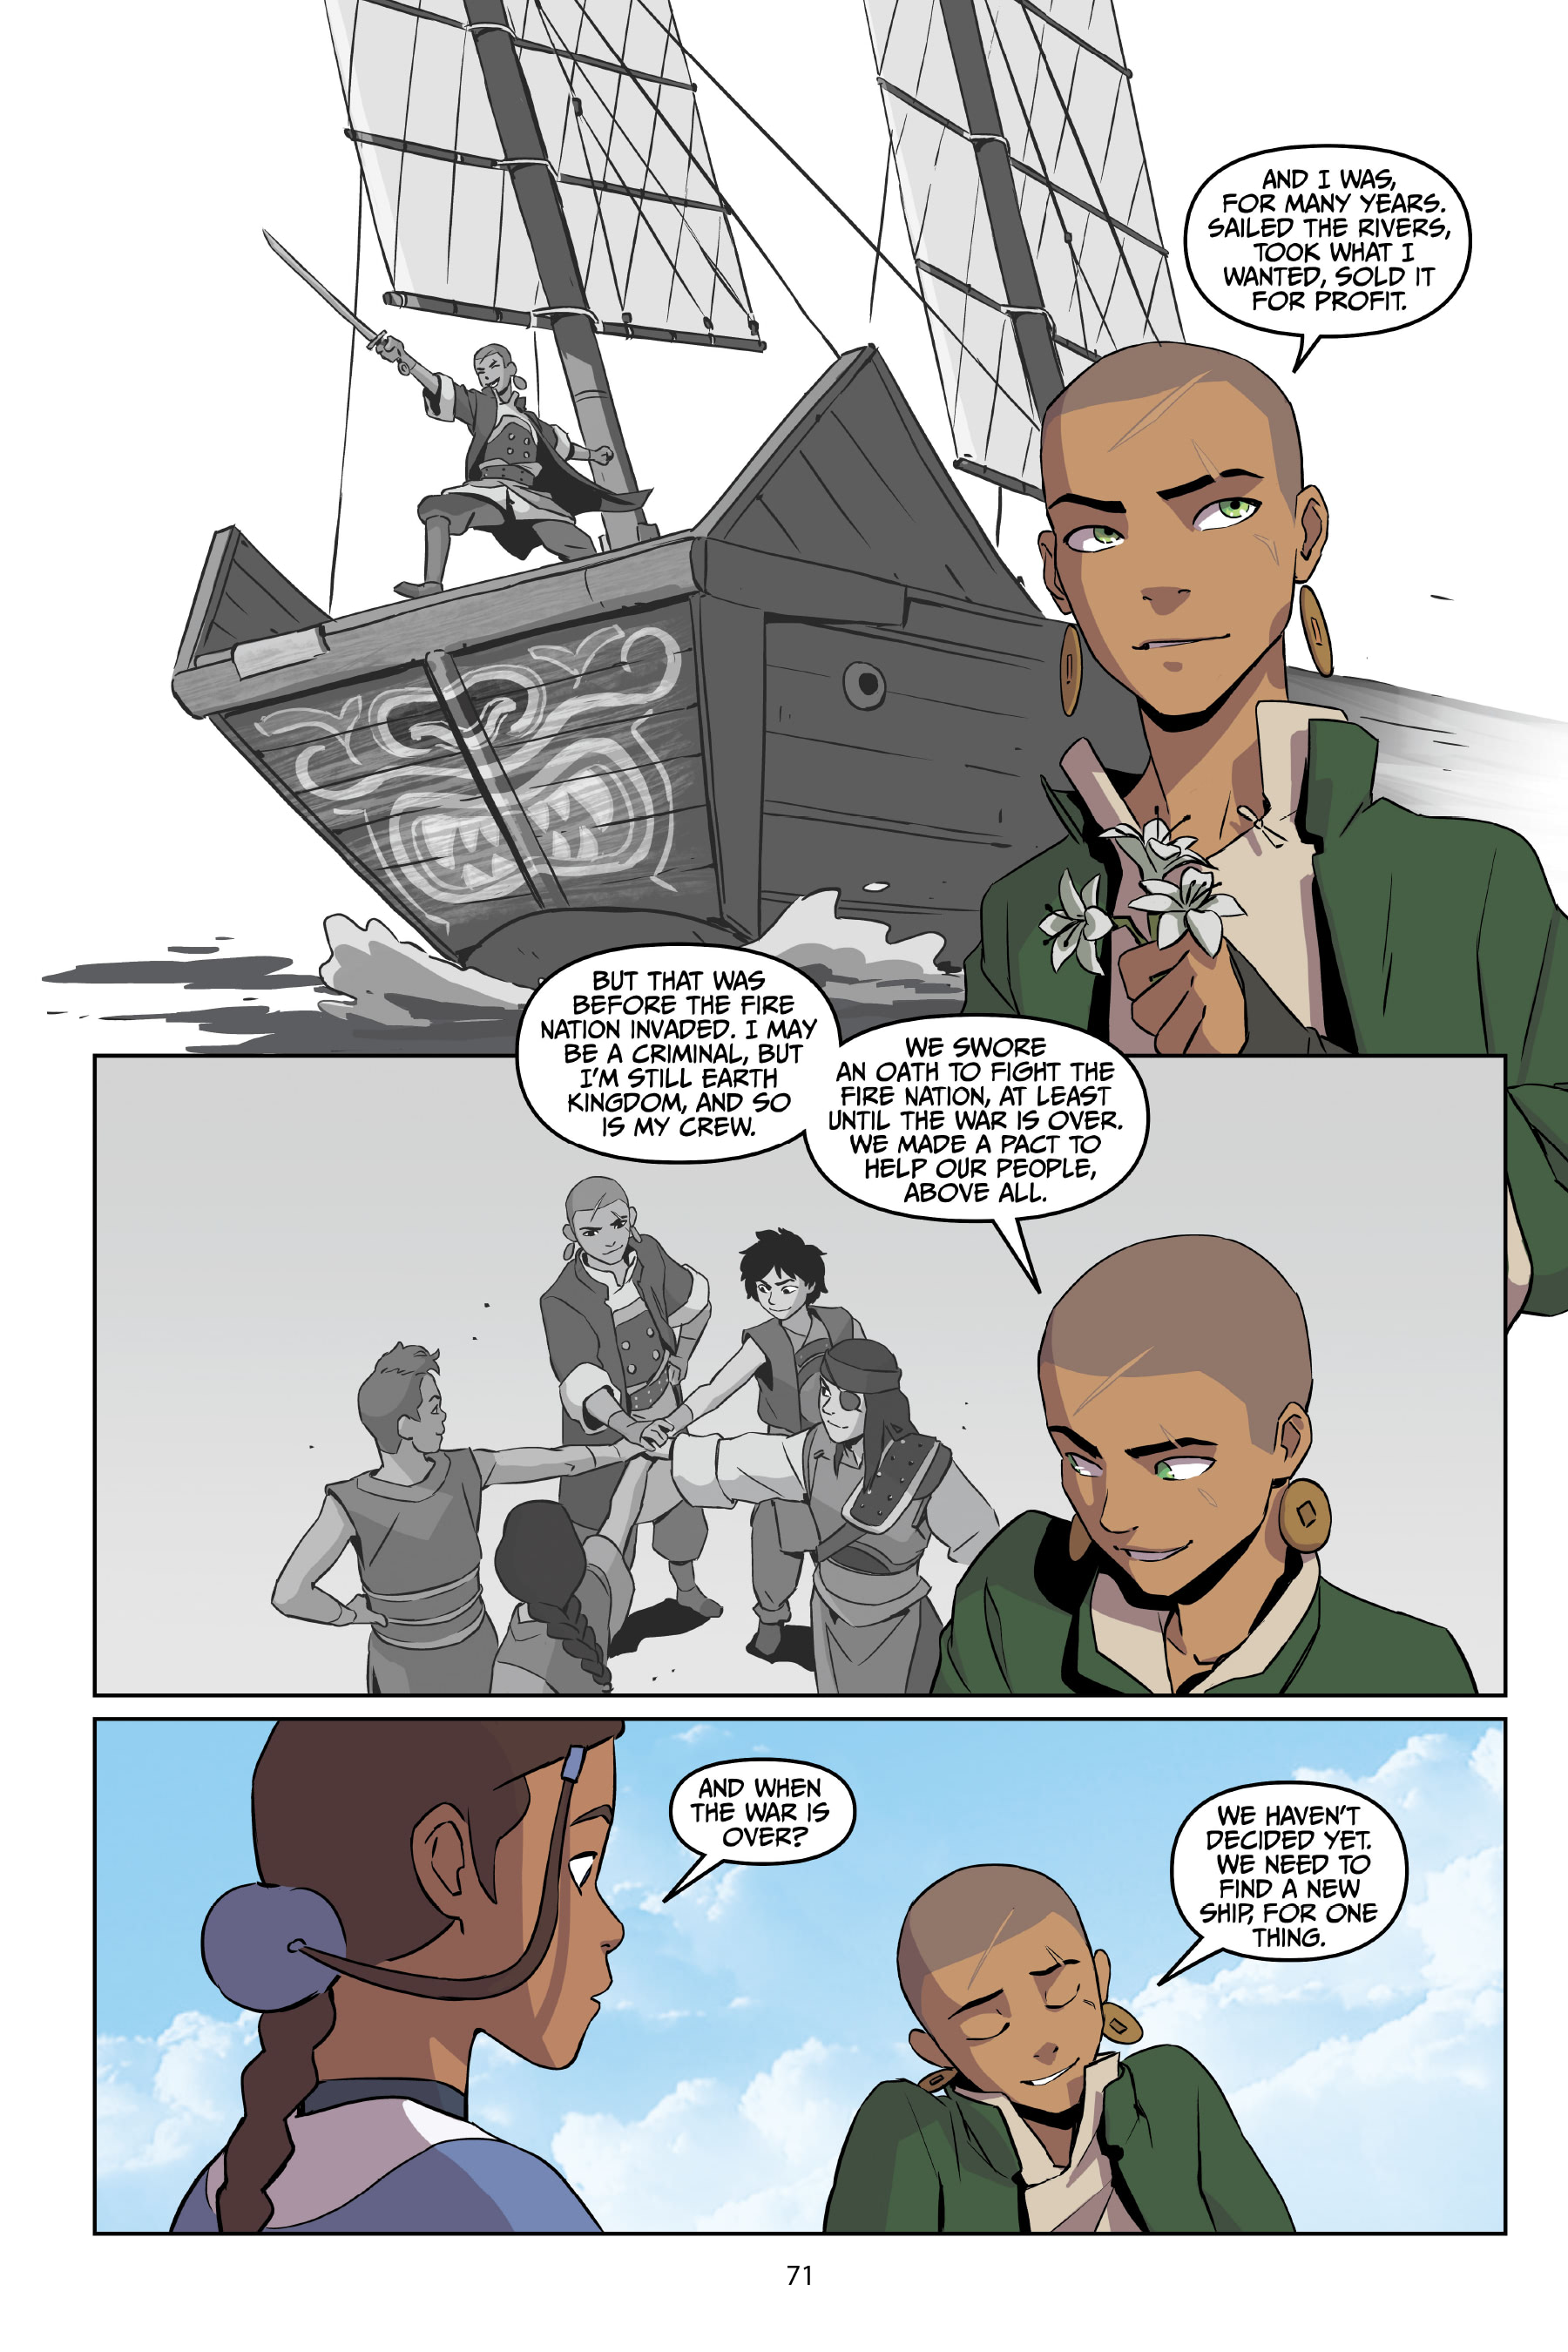 81 Top Best Writers Avatar The Last Airbender Book 3 Chapter 6 for Kids